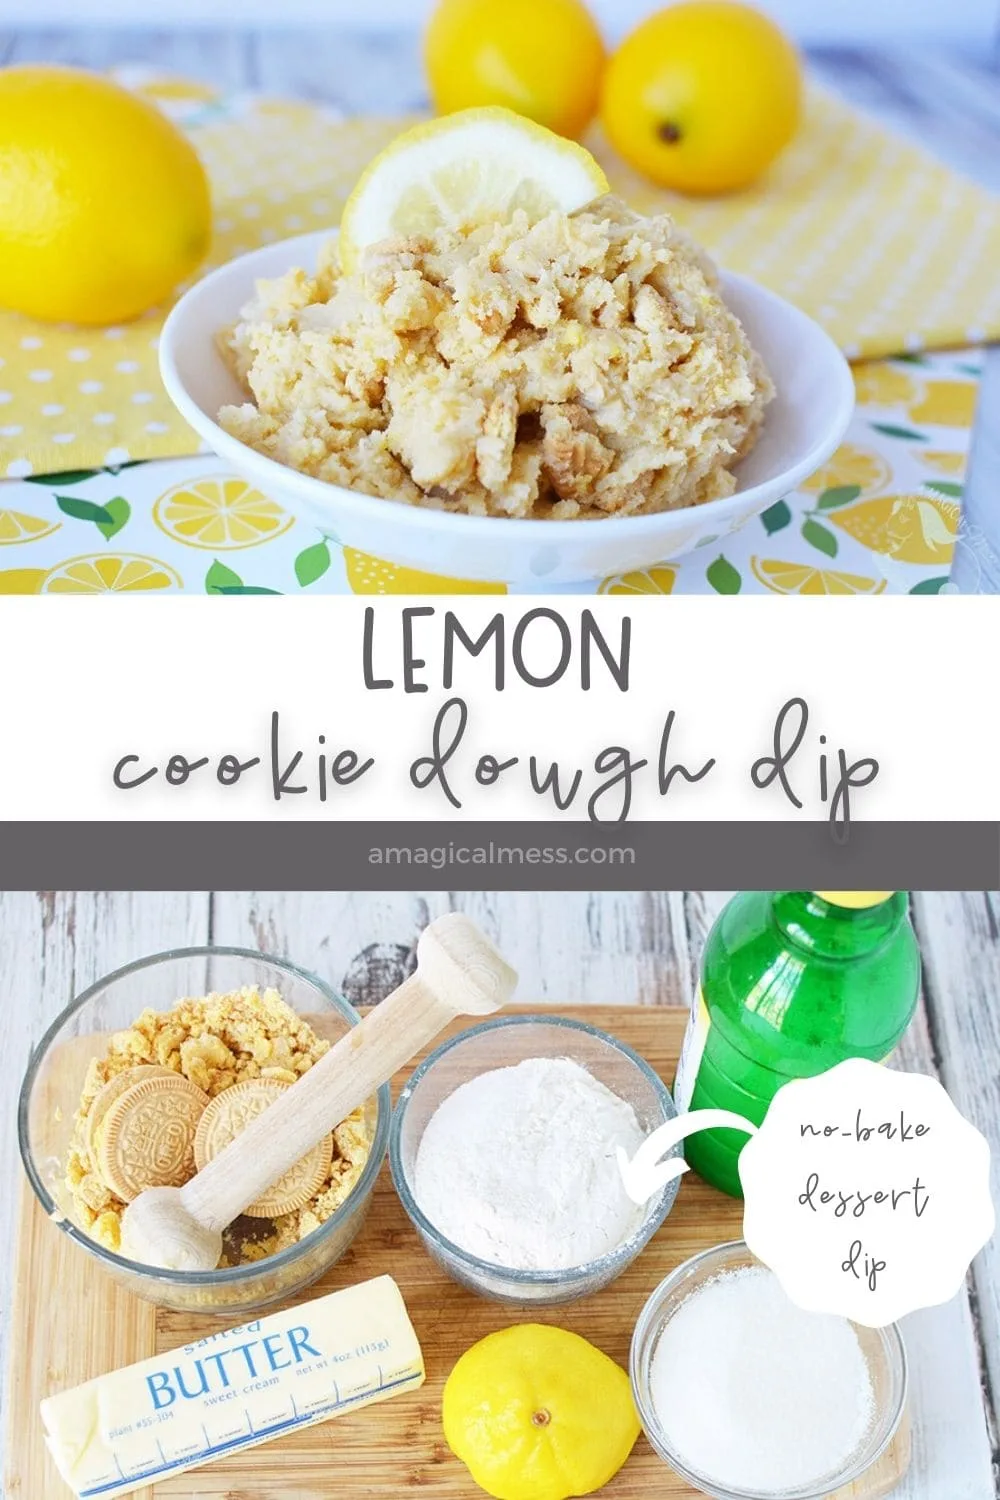 cookie dough in a bowl and lemony ingredients